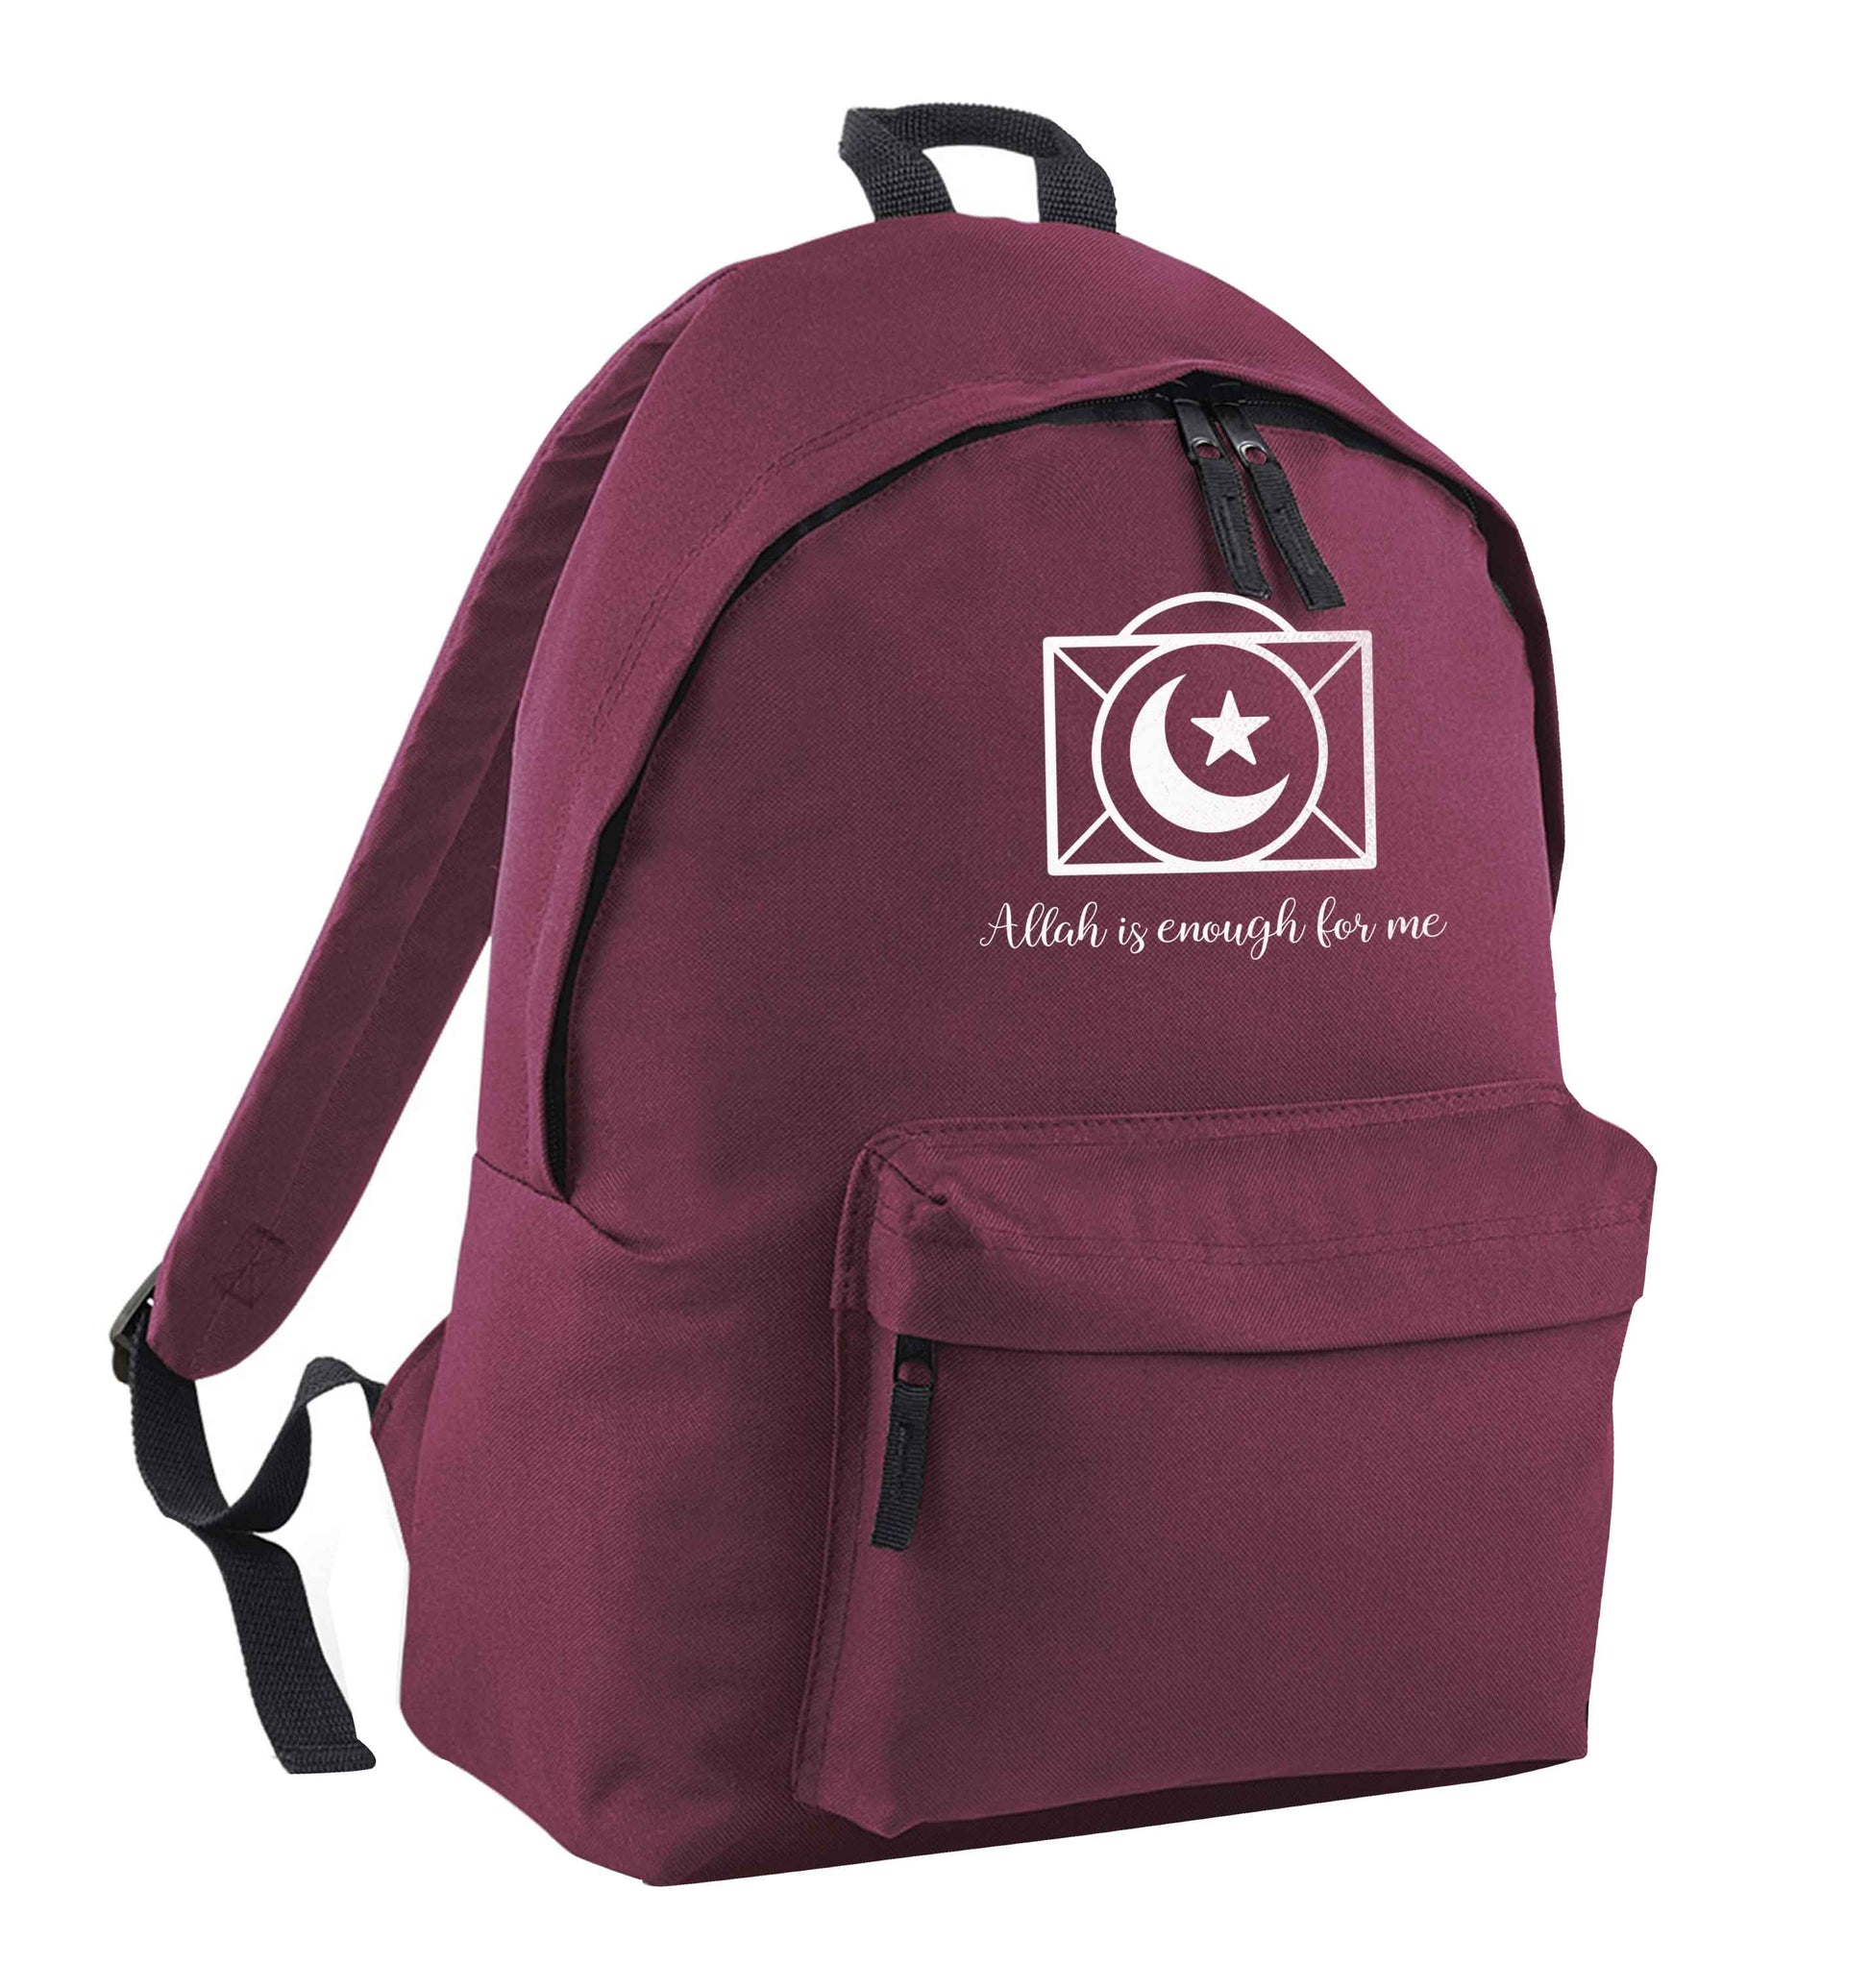 Allah is enough for me maroon adults backpack